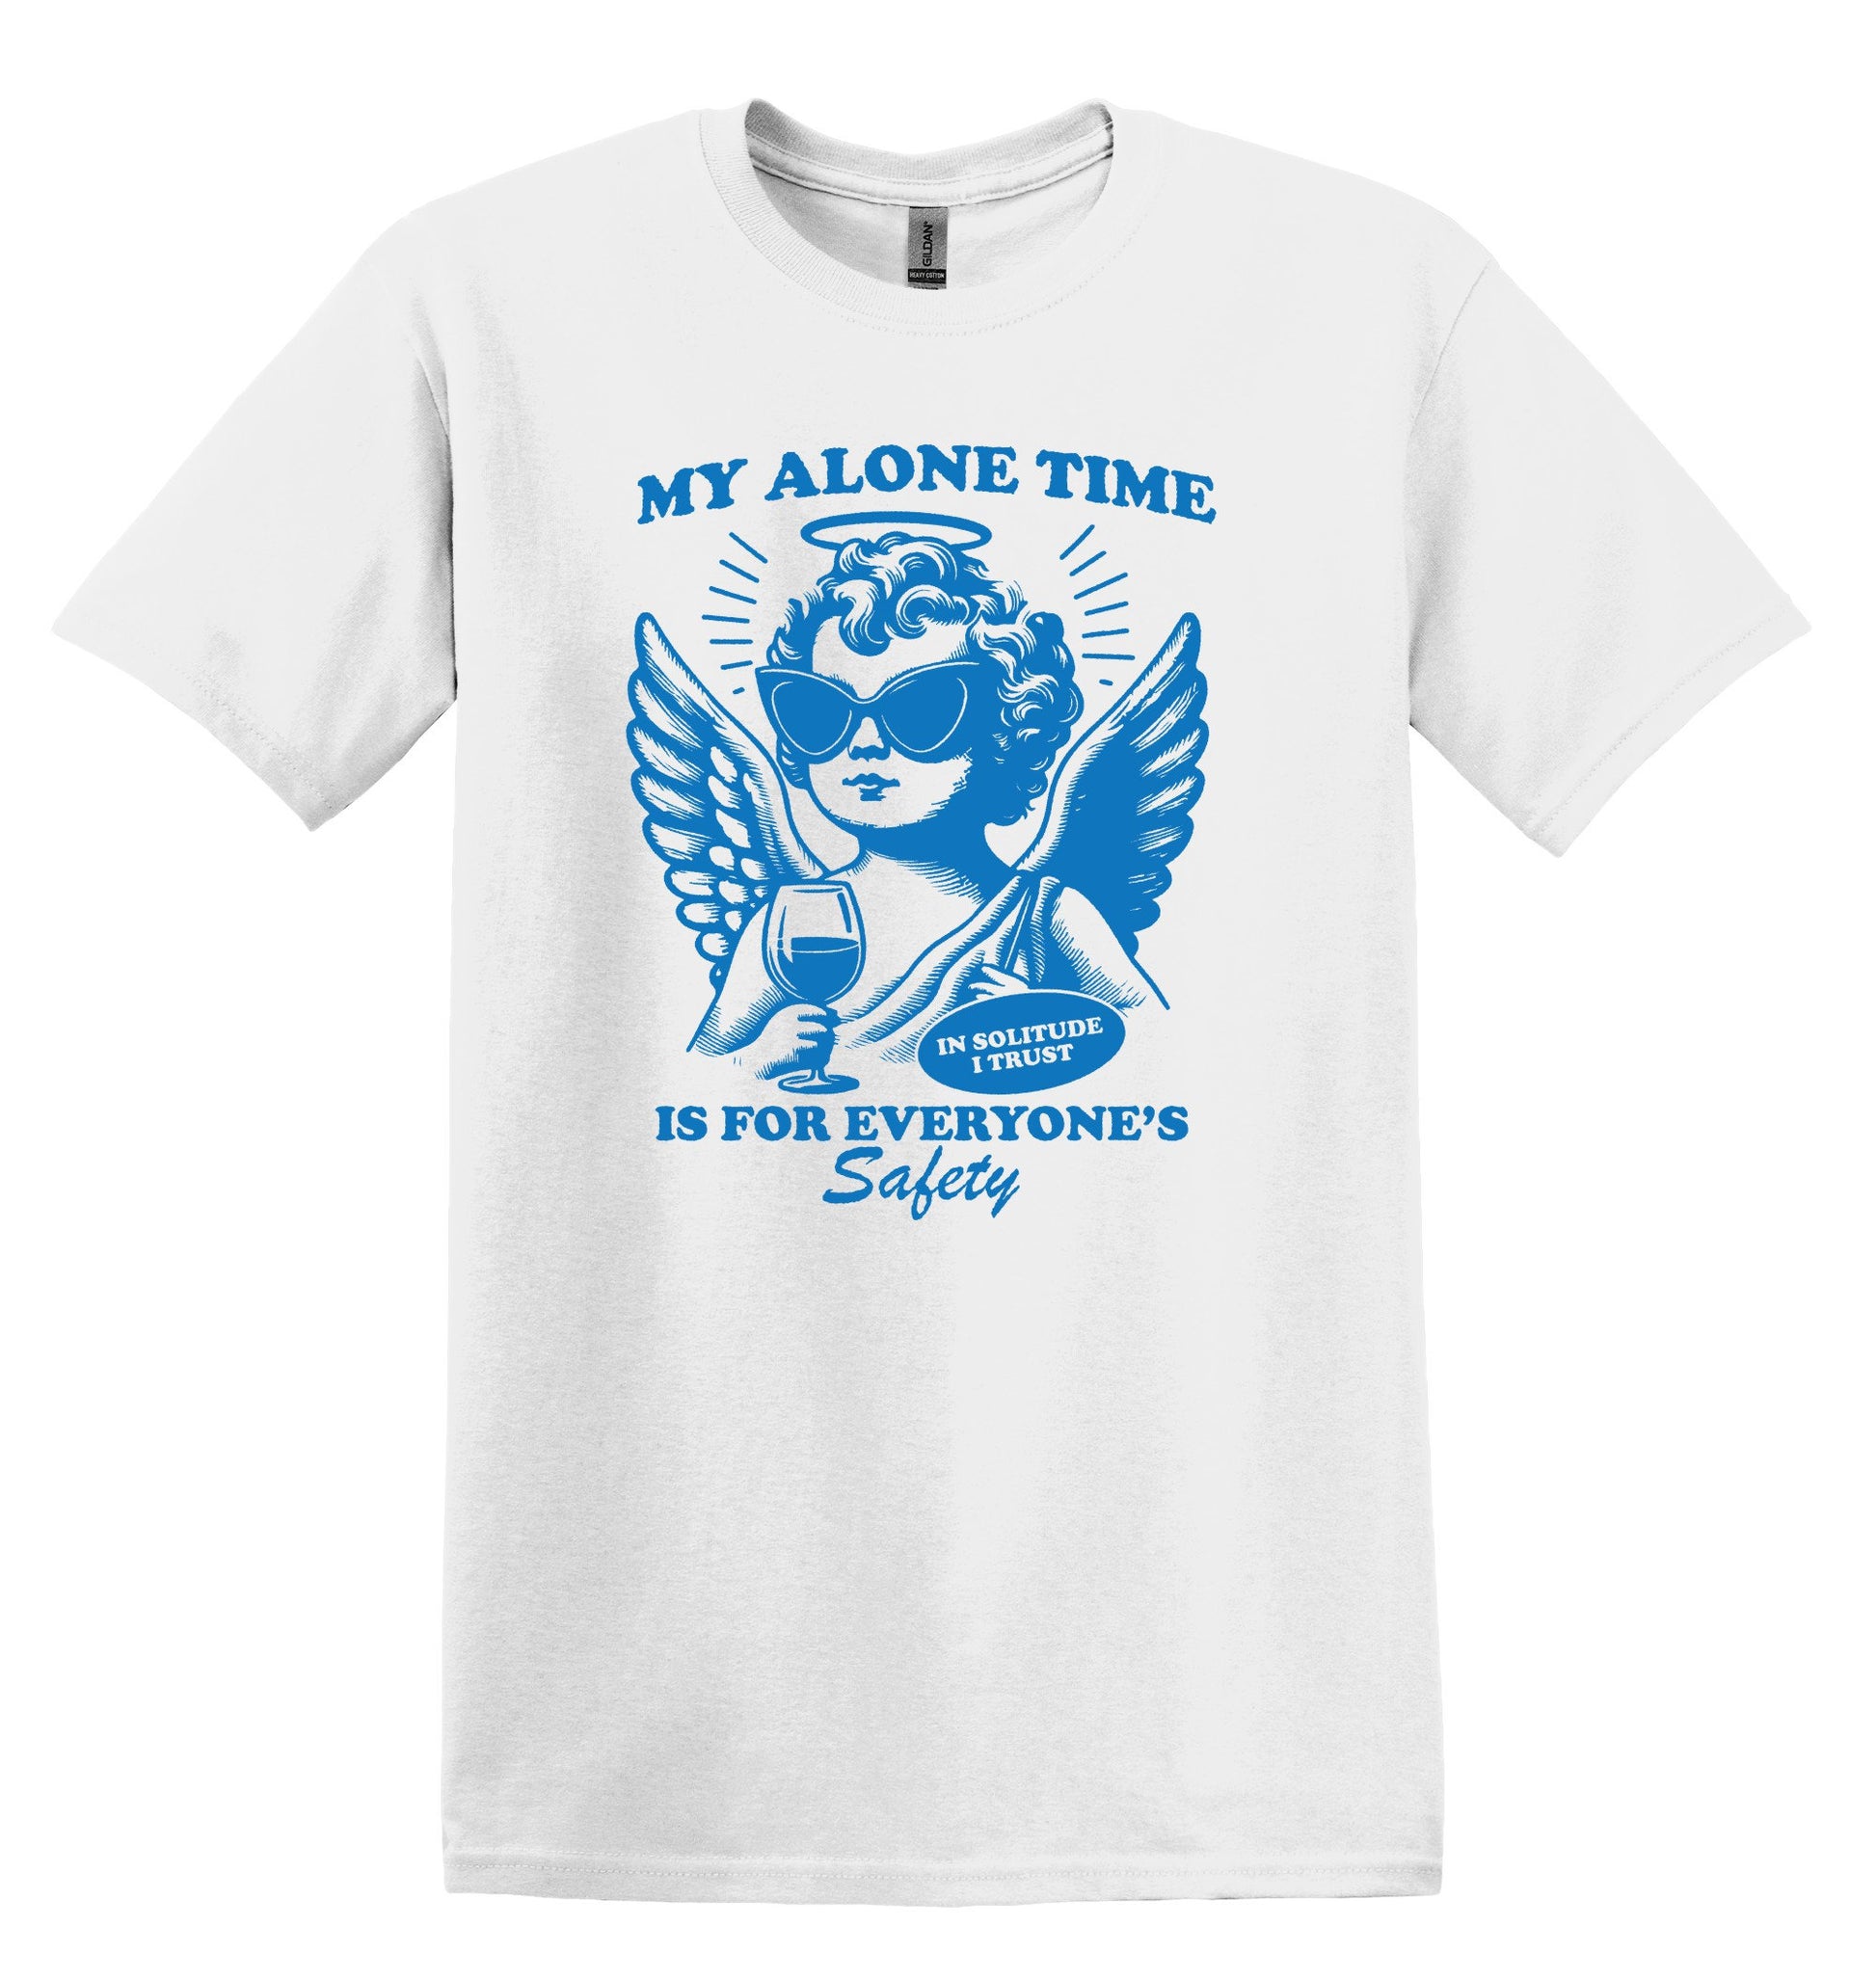 My Alone Time is for Everyone's Saftey Shirt Minimalist Gag Shirt Meme Shirt Funny Unisex Shirt Cool Friends Gift